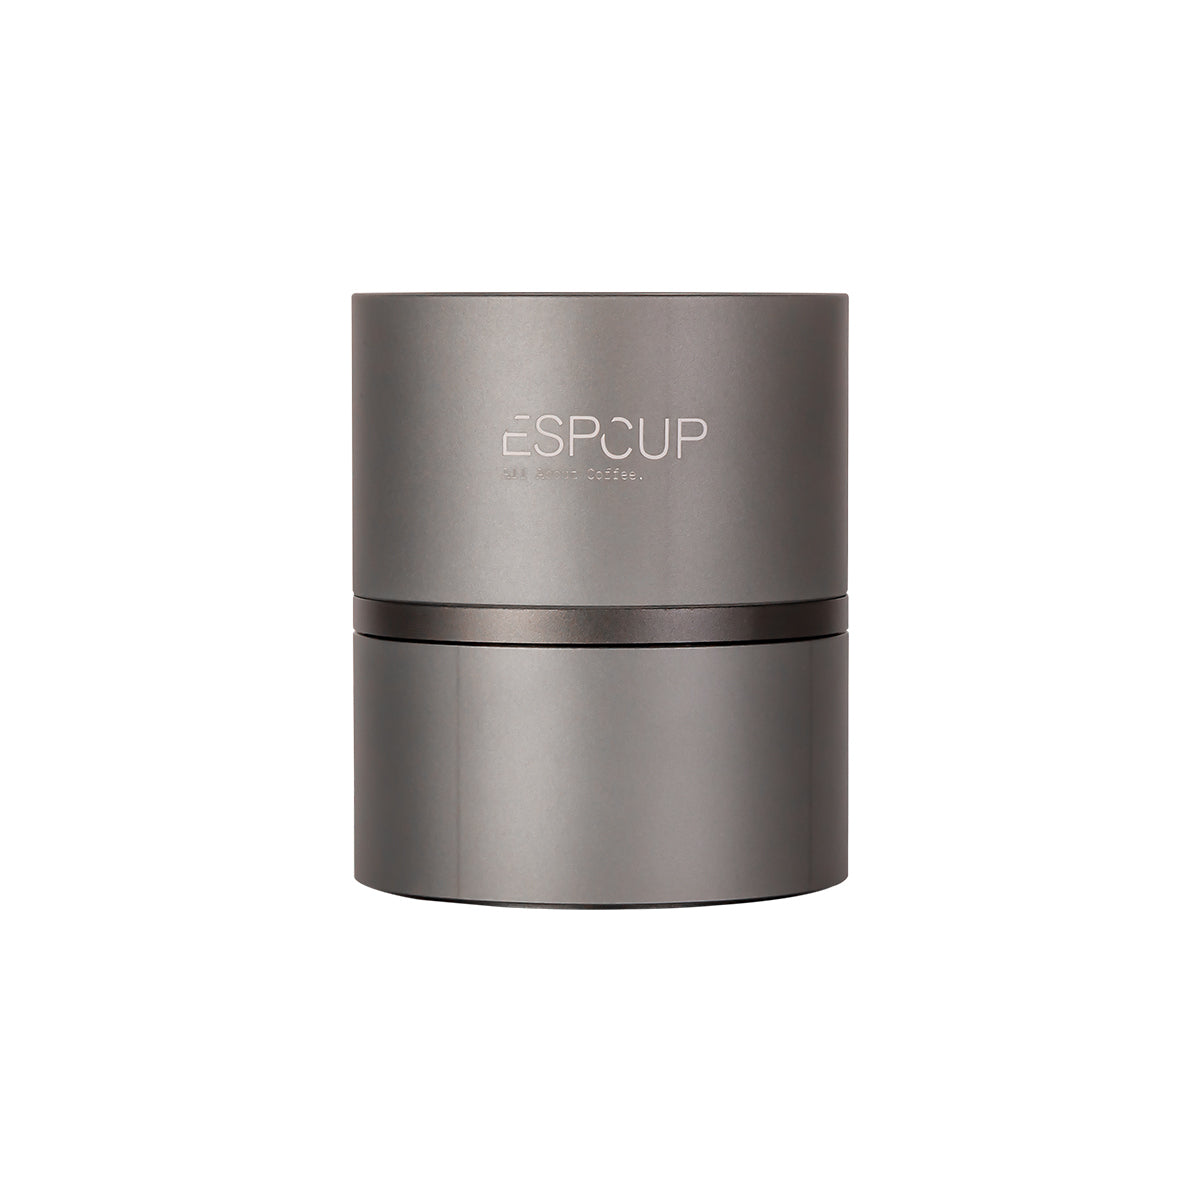 ESPCUP - Sifter